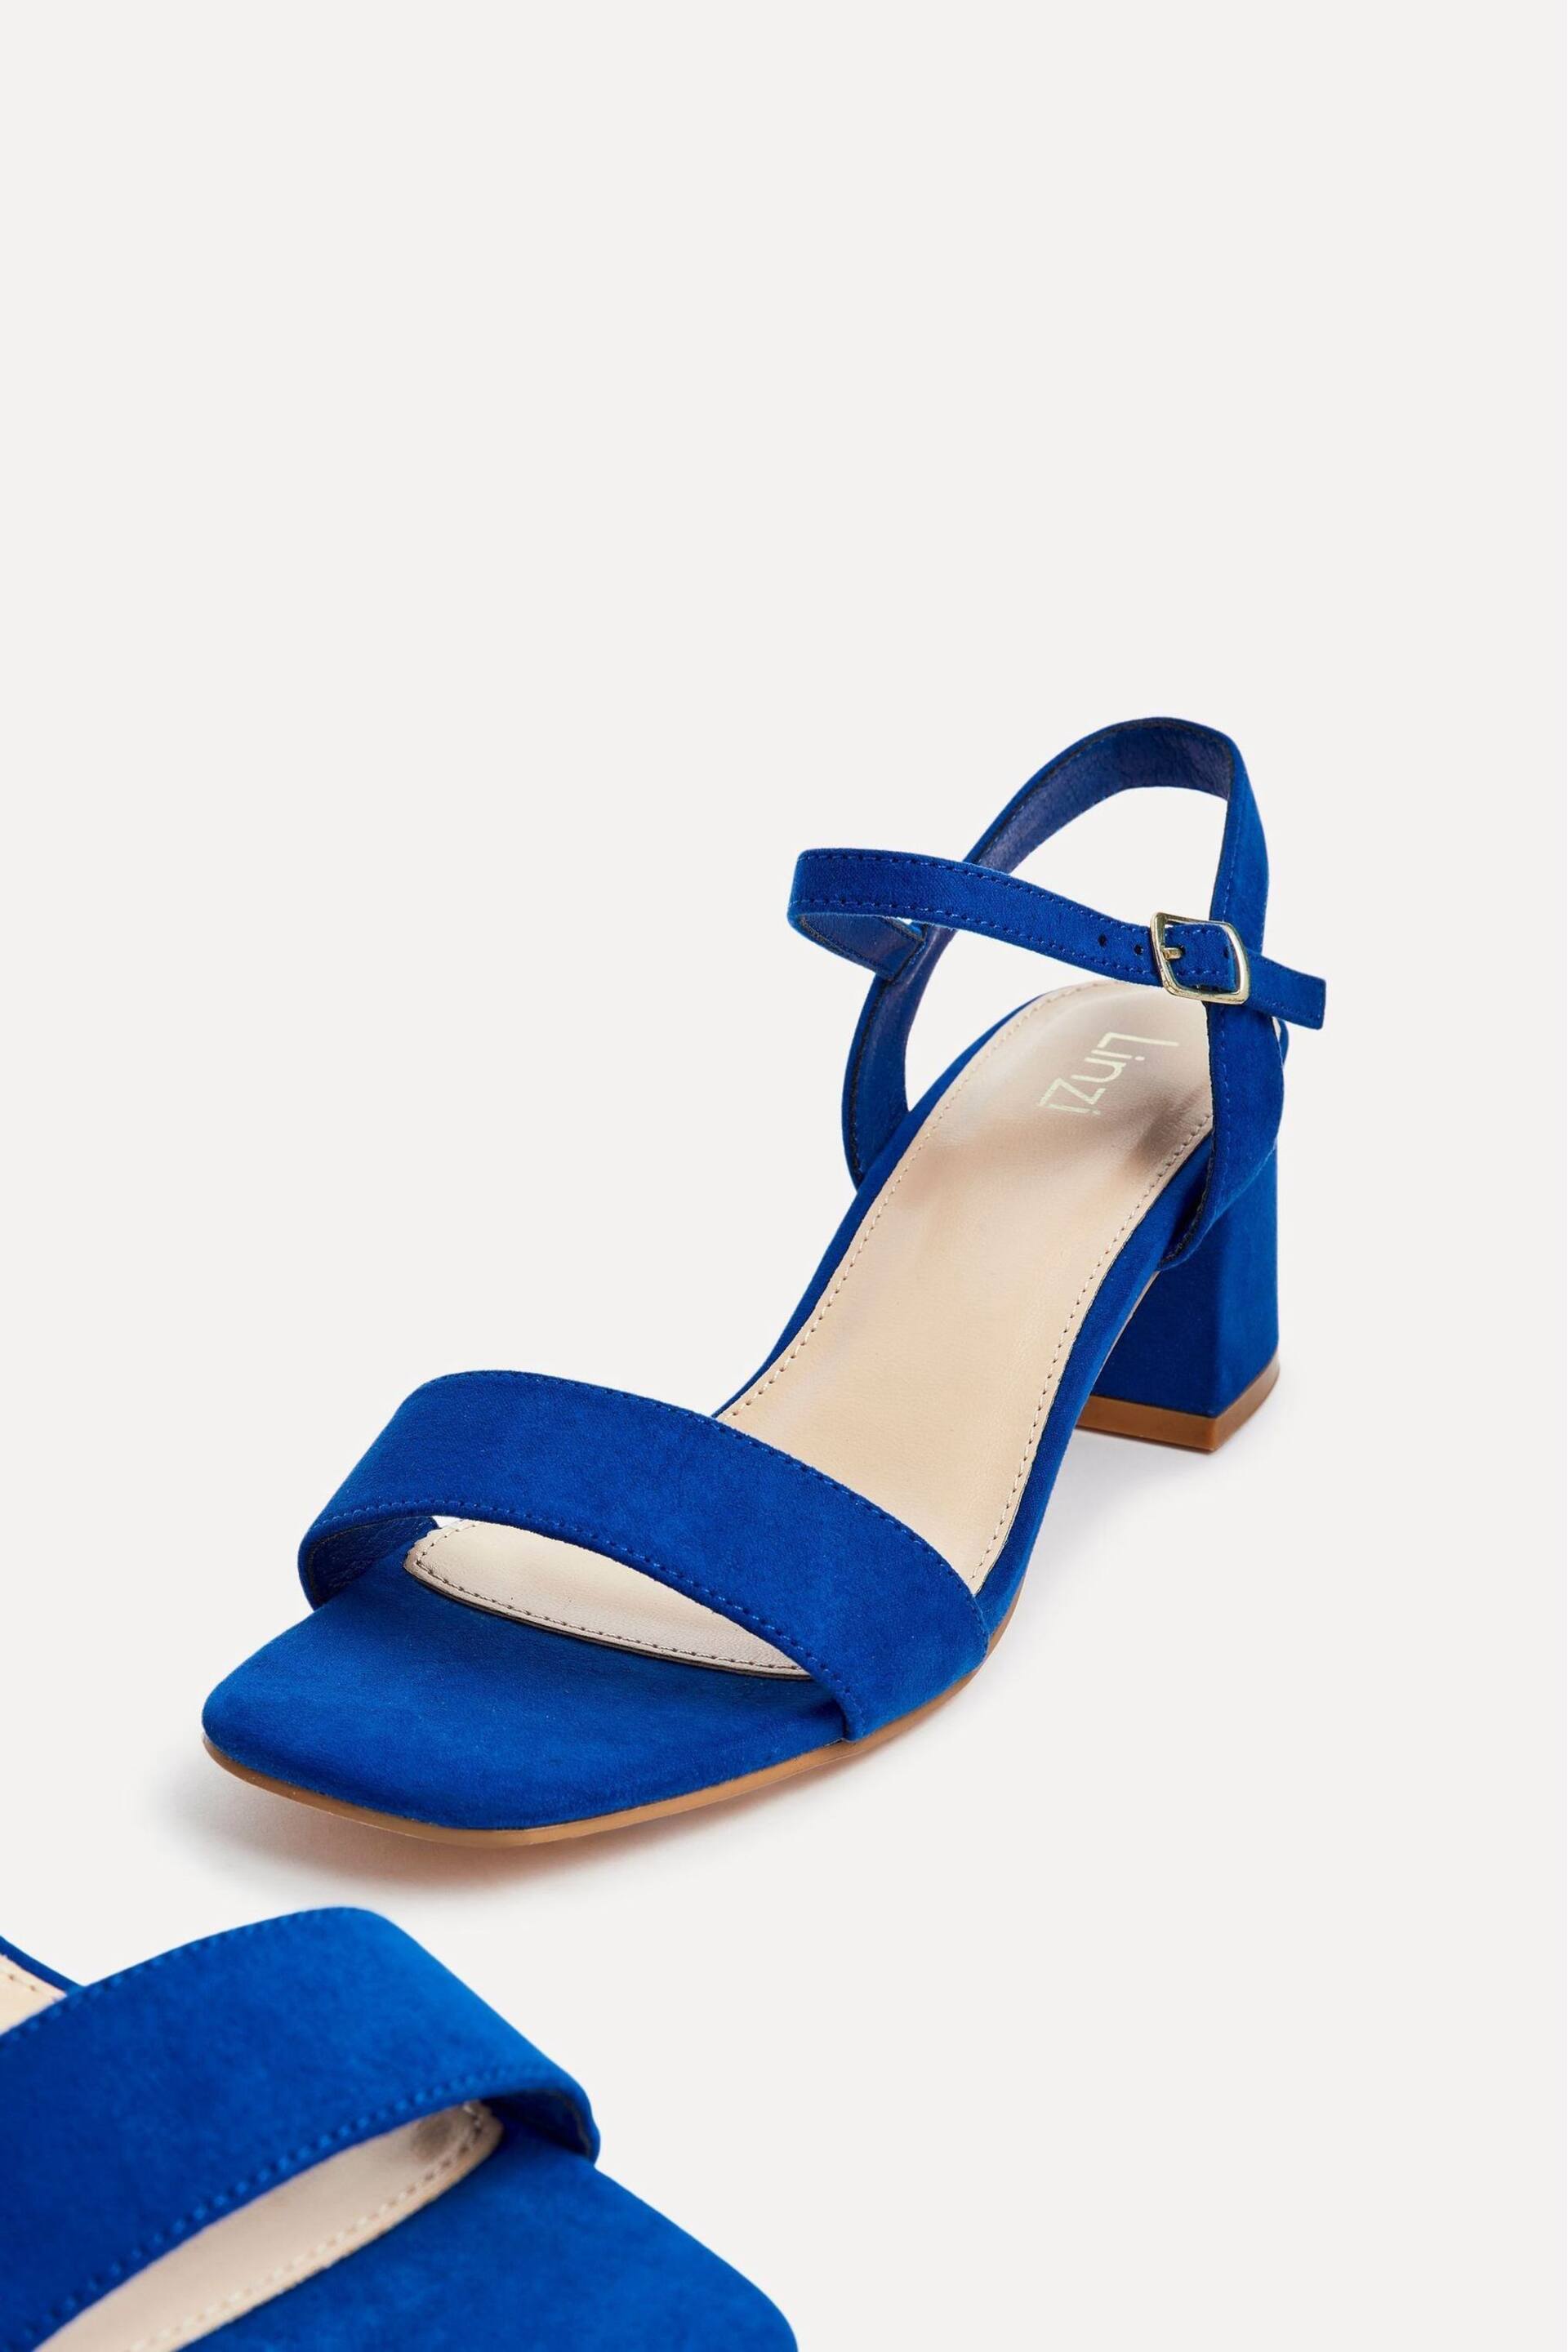 Linzi Cobalt Blue Darcie Barely There Block Heeled Sandals - Image 9 of 9